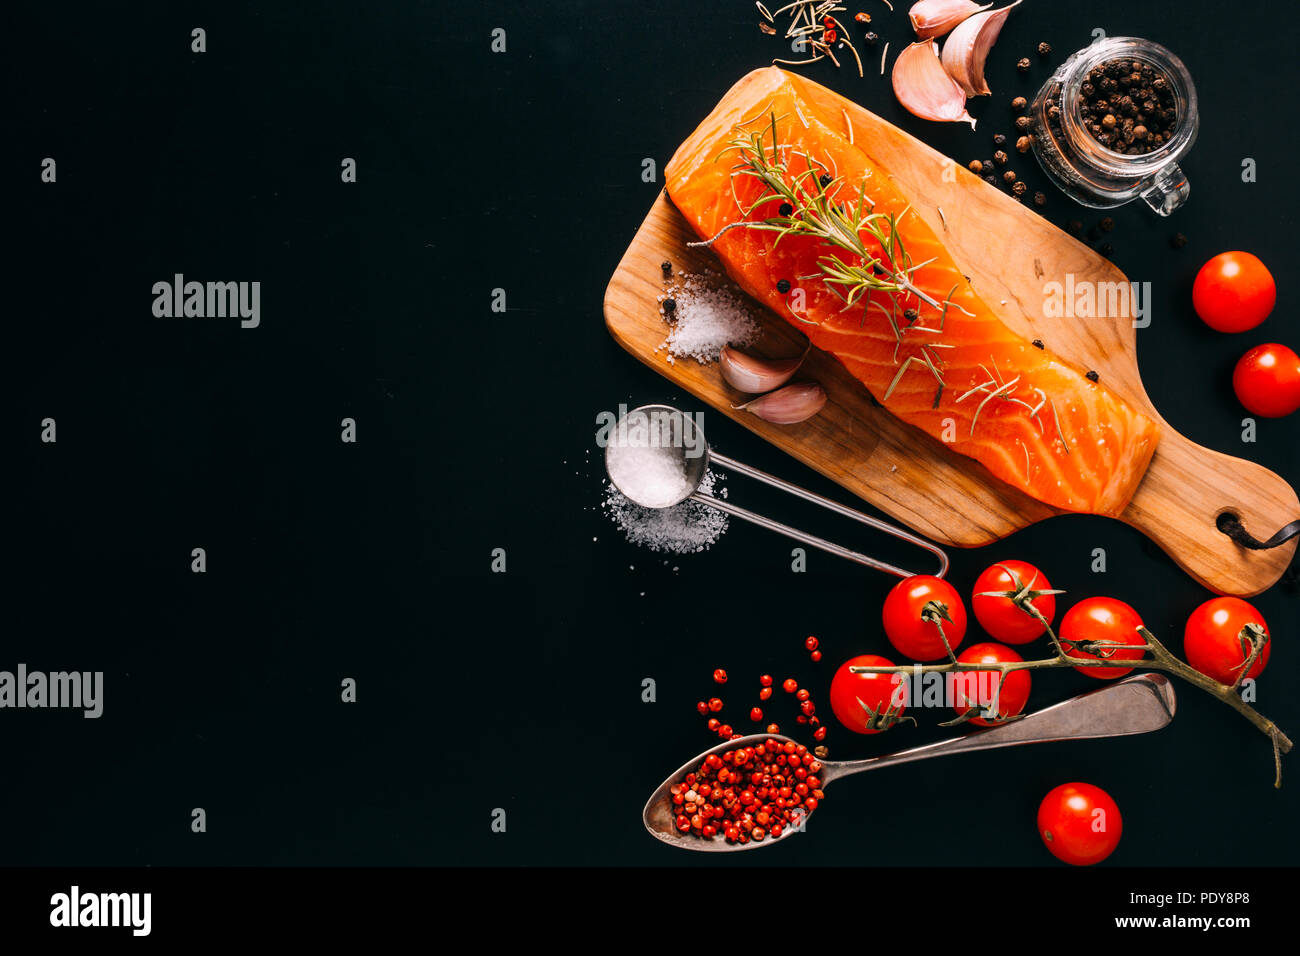 Delicious Salmon fillet with various spices on black background Stock Photo